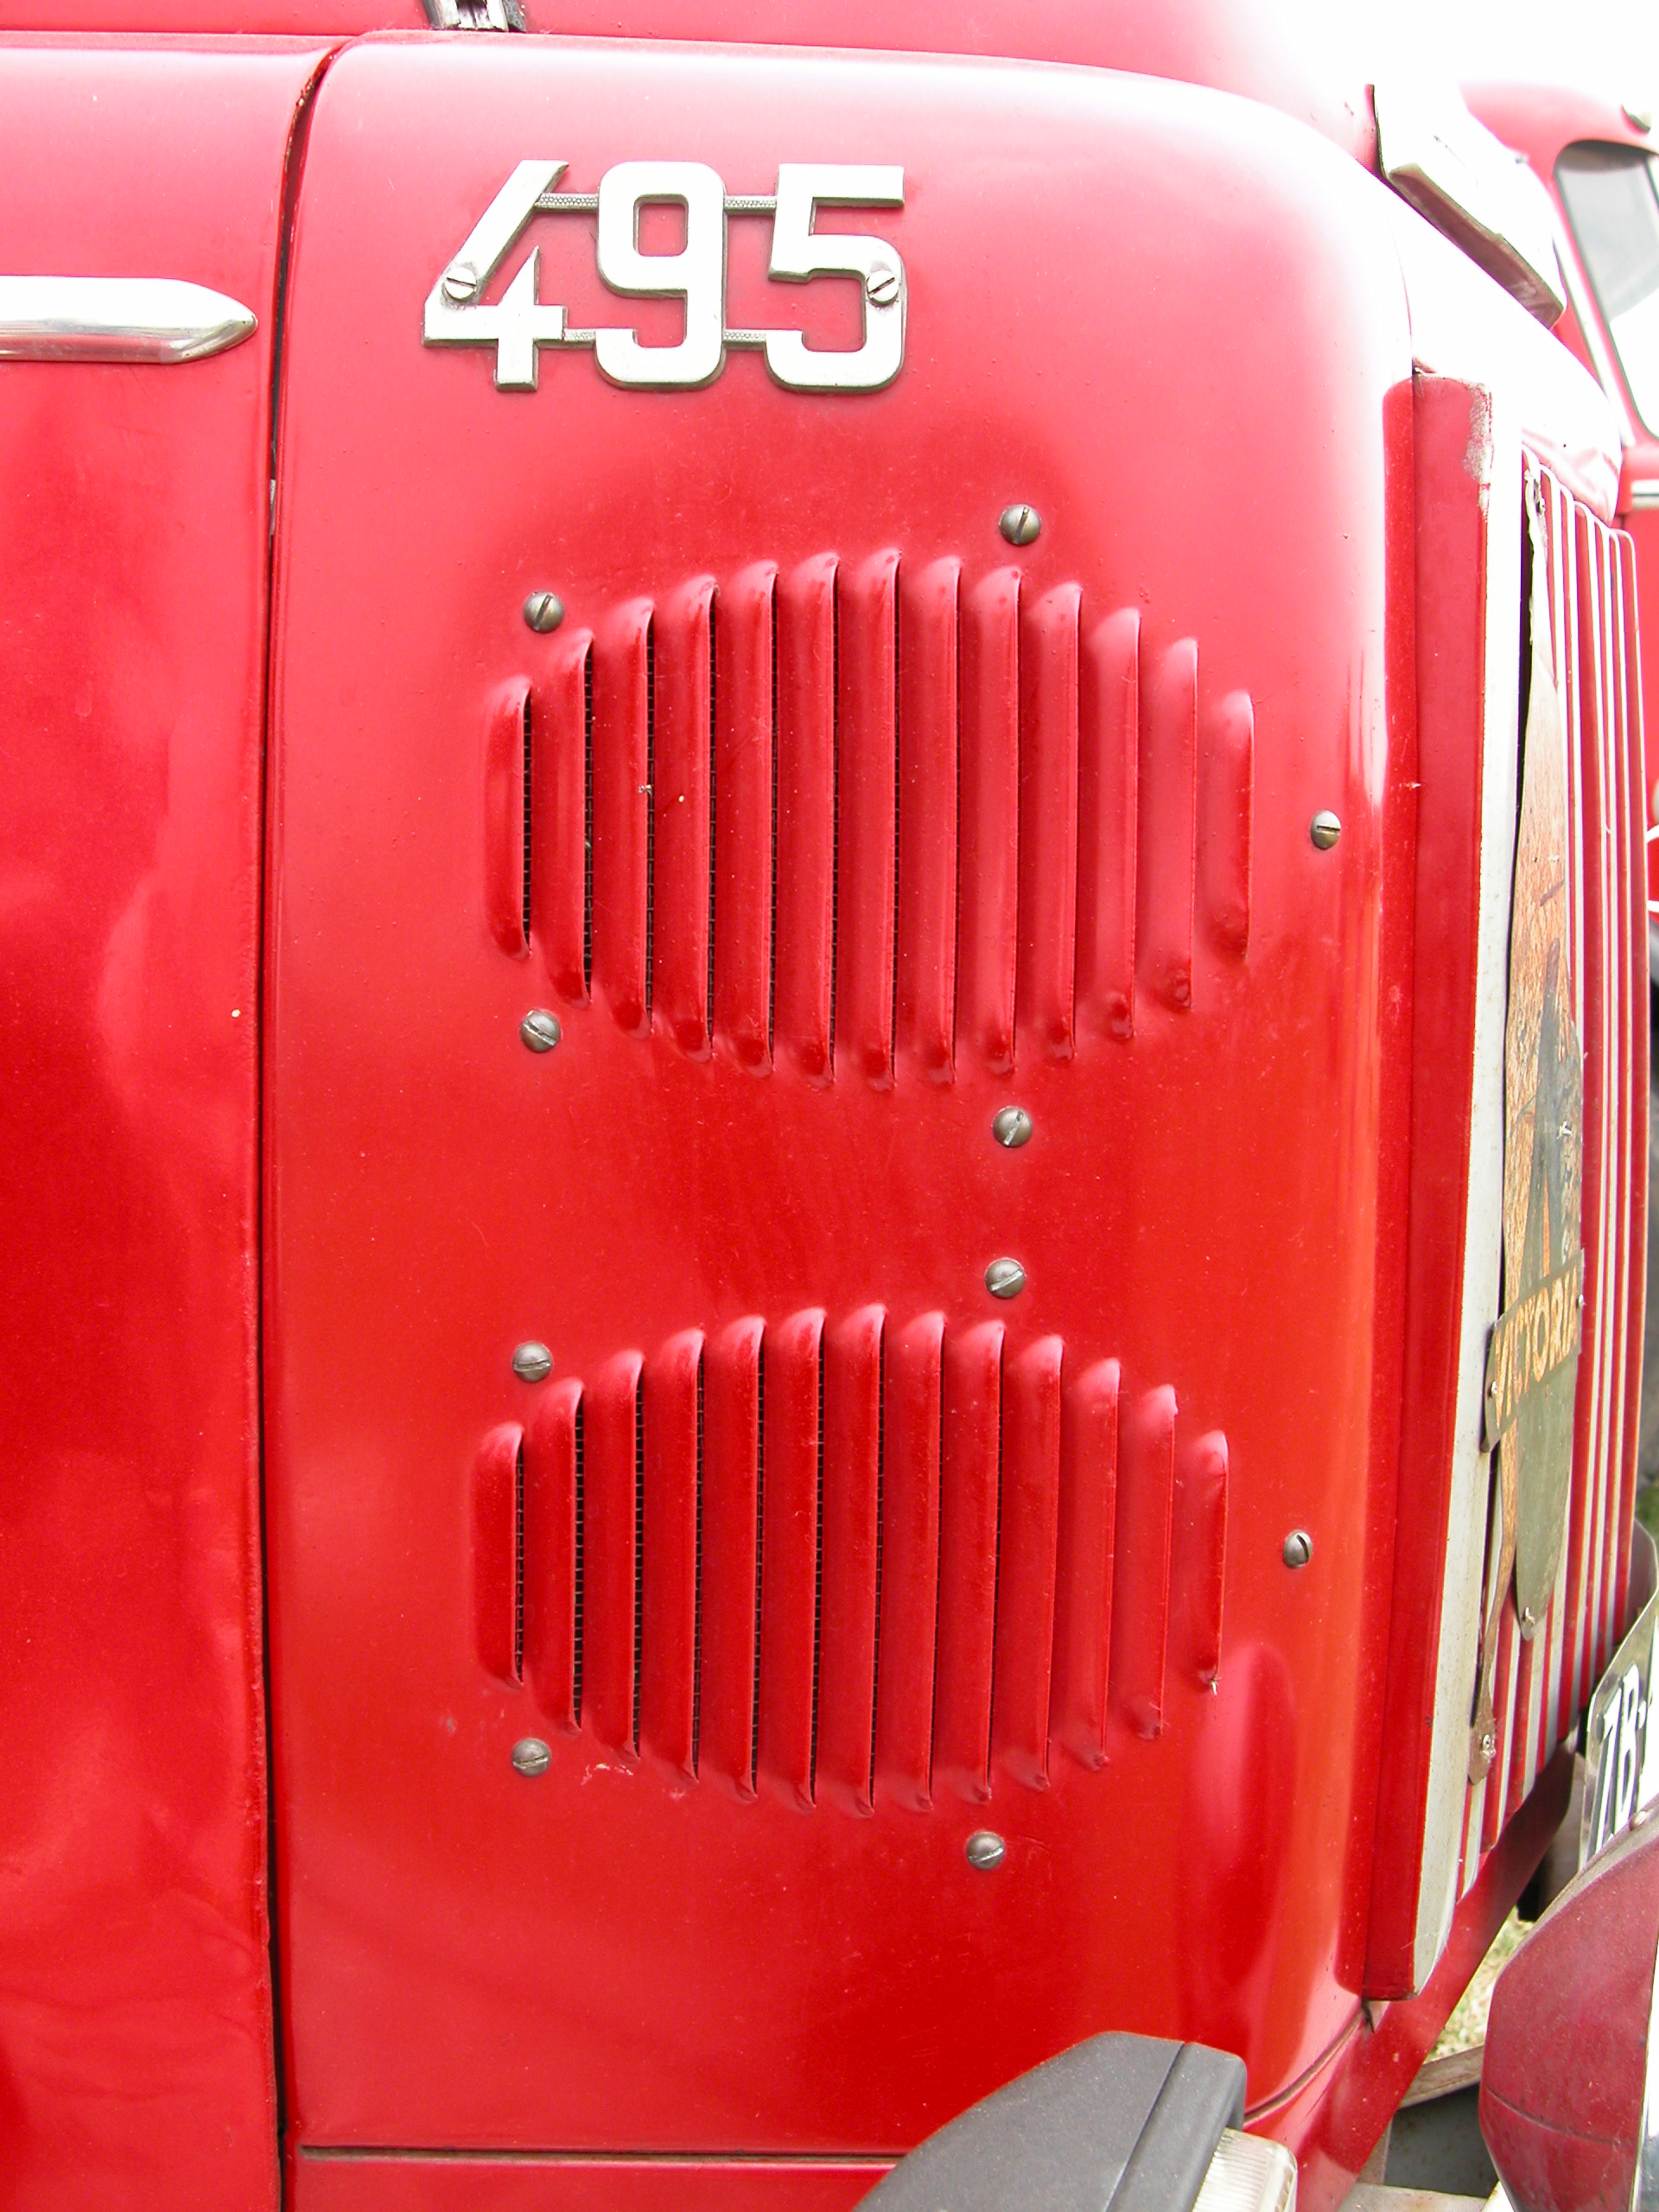 car plastic red grating shiny metal 495 front vehicle